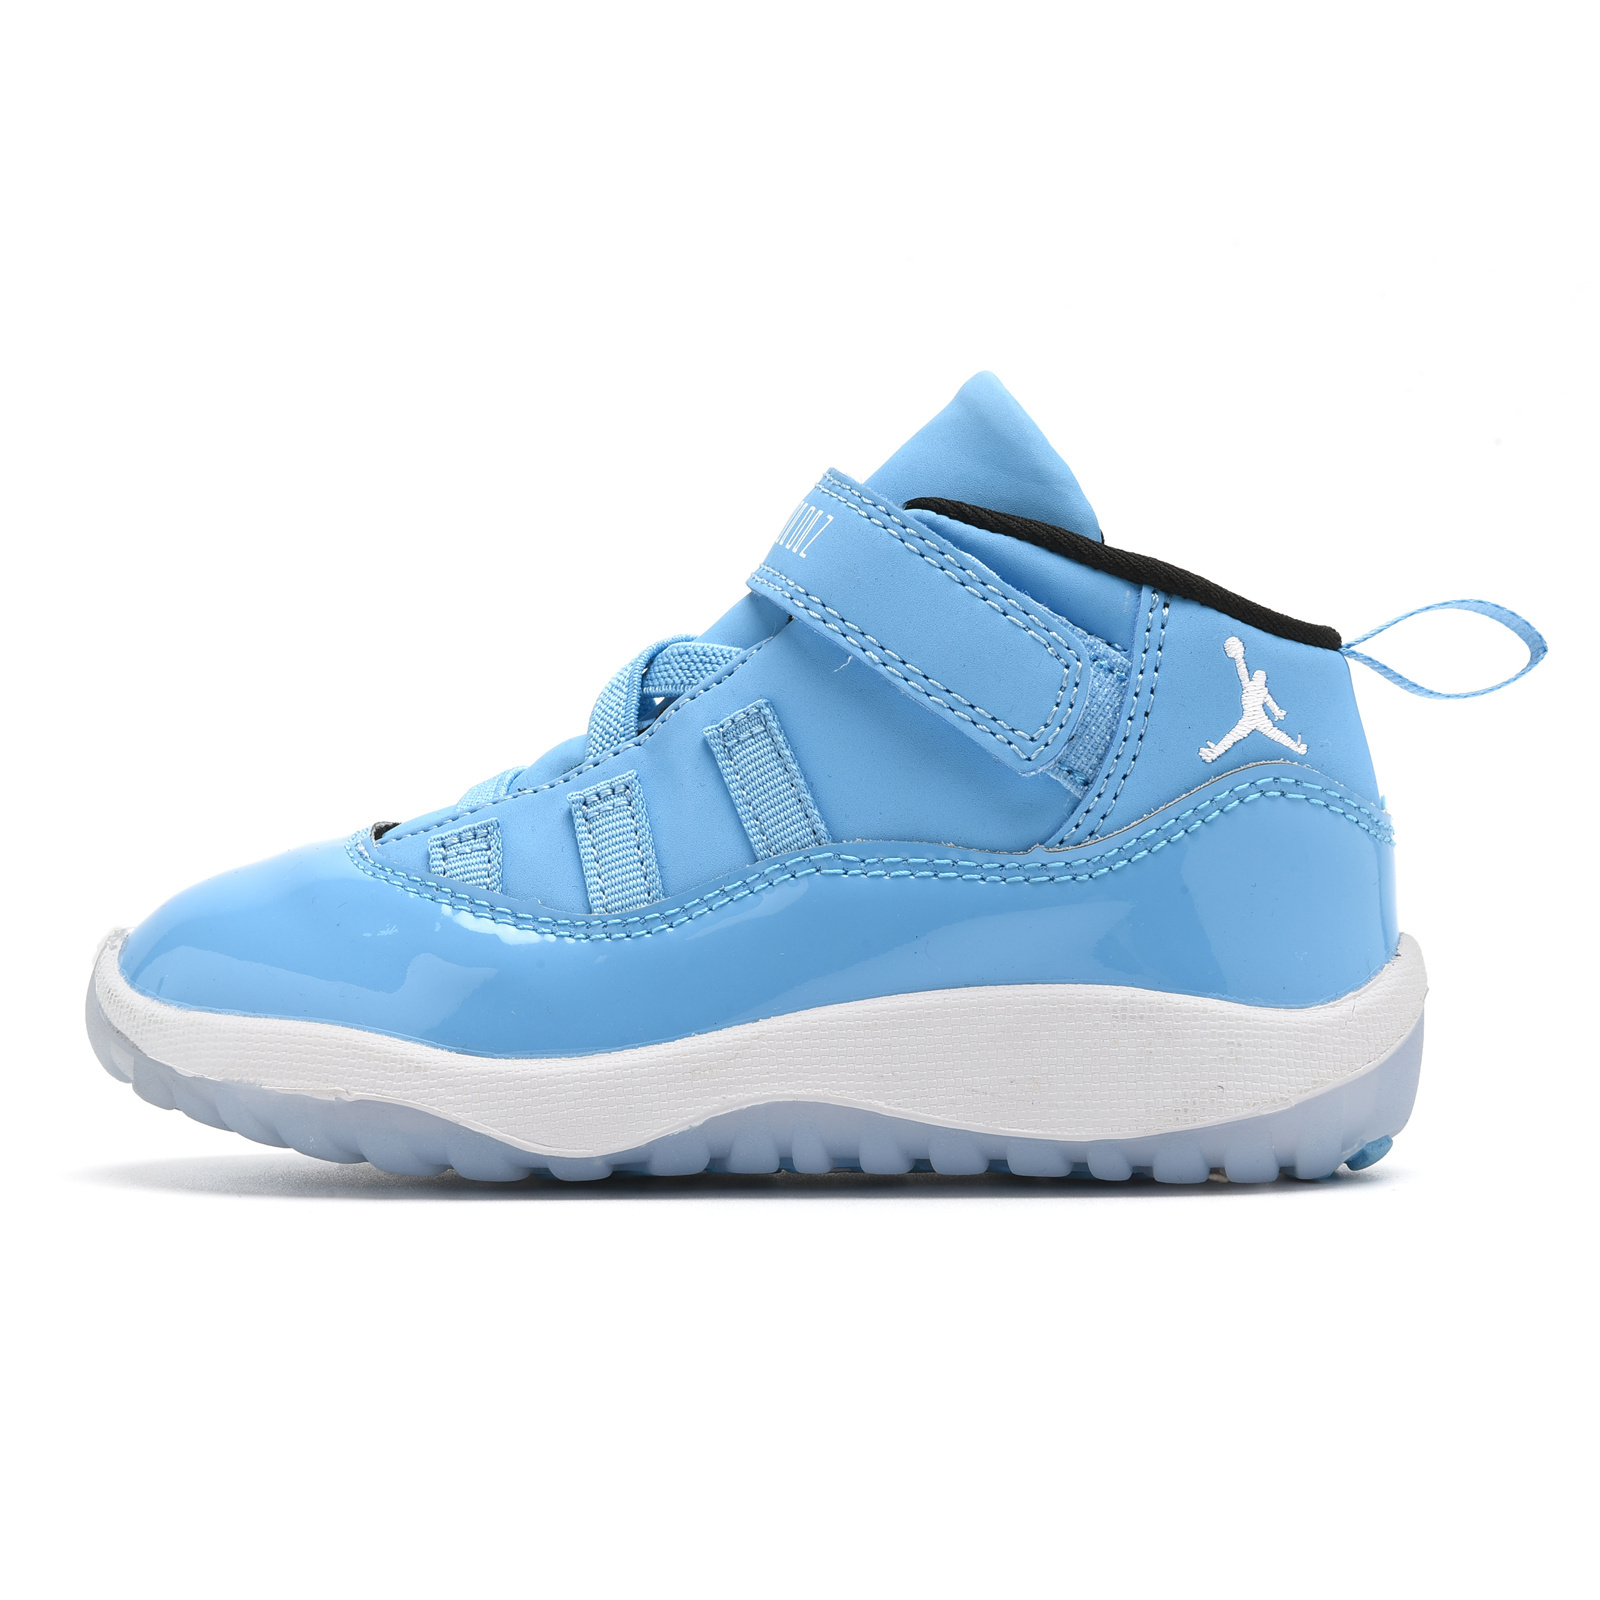 Youth Running Weapon Air Jordan 11 Blue Shoes 038